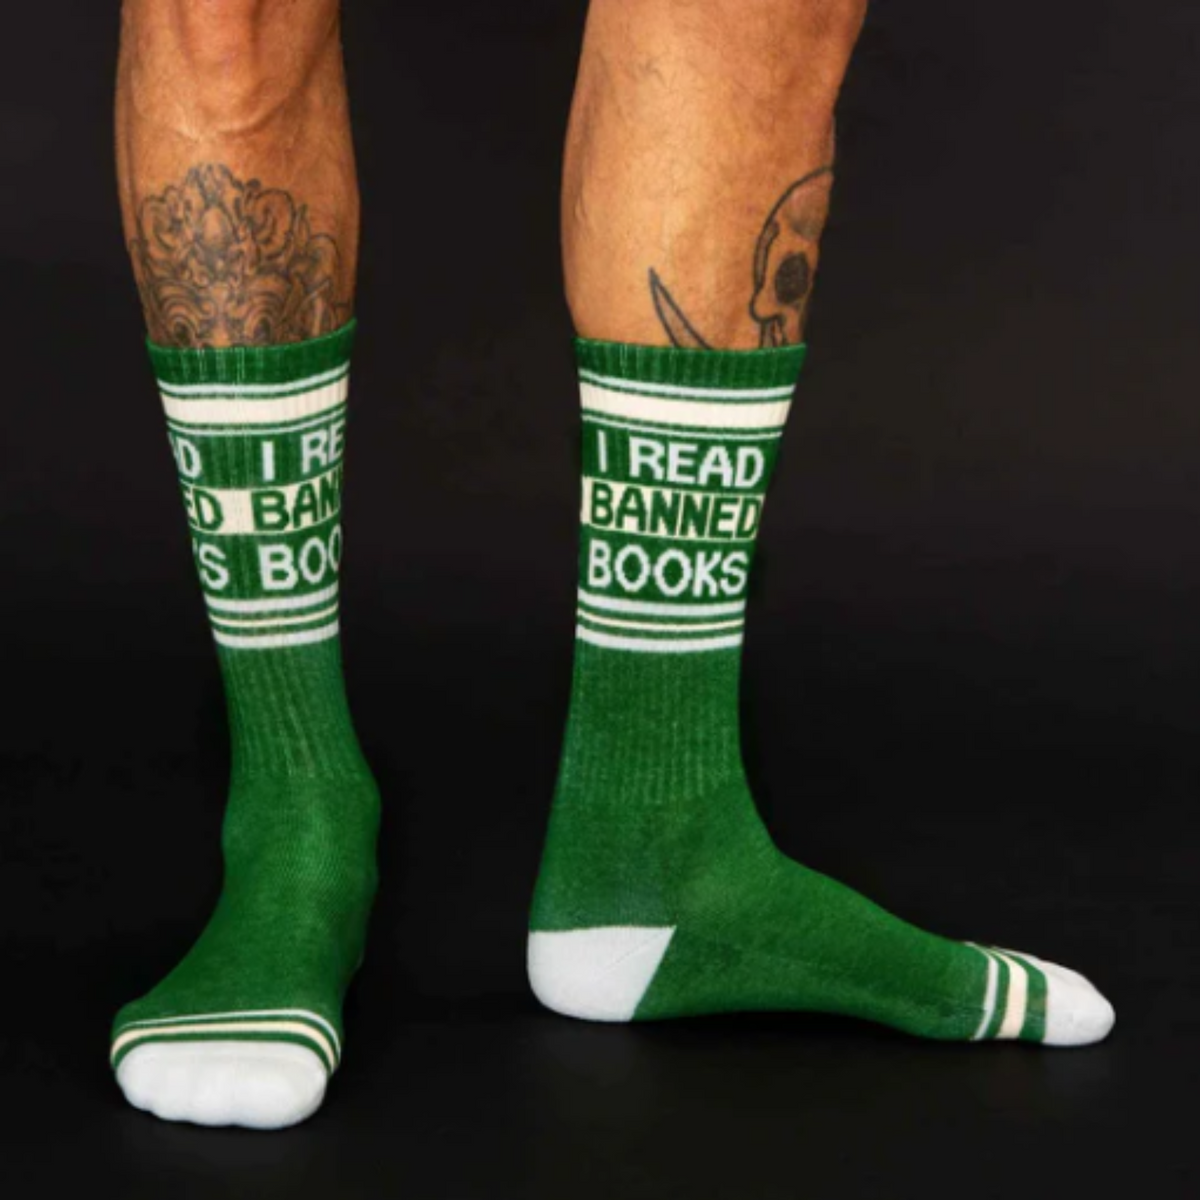 Gumball Poodle I Read Banned Books women&#39;s and men&#39;s crew sock featuring green sock with &quot;I Read Banned Books&quot; at top. Socks worn by model. 